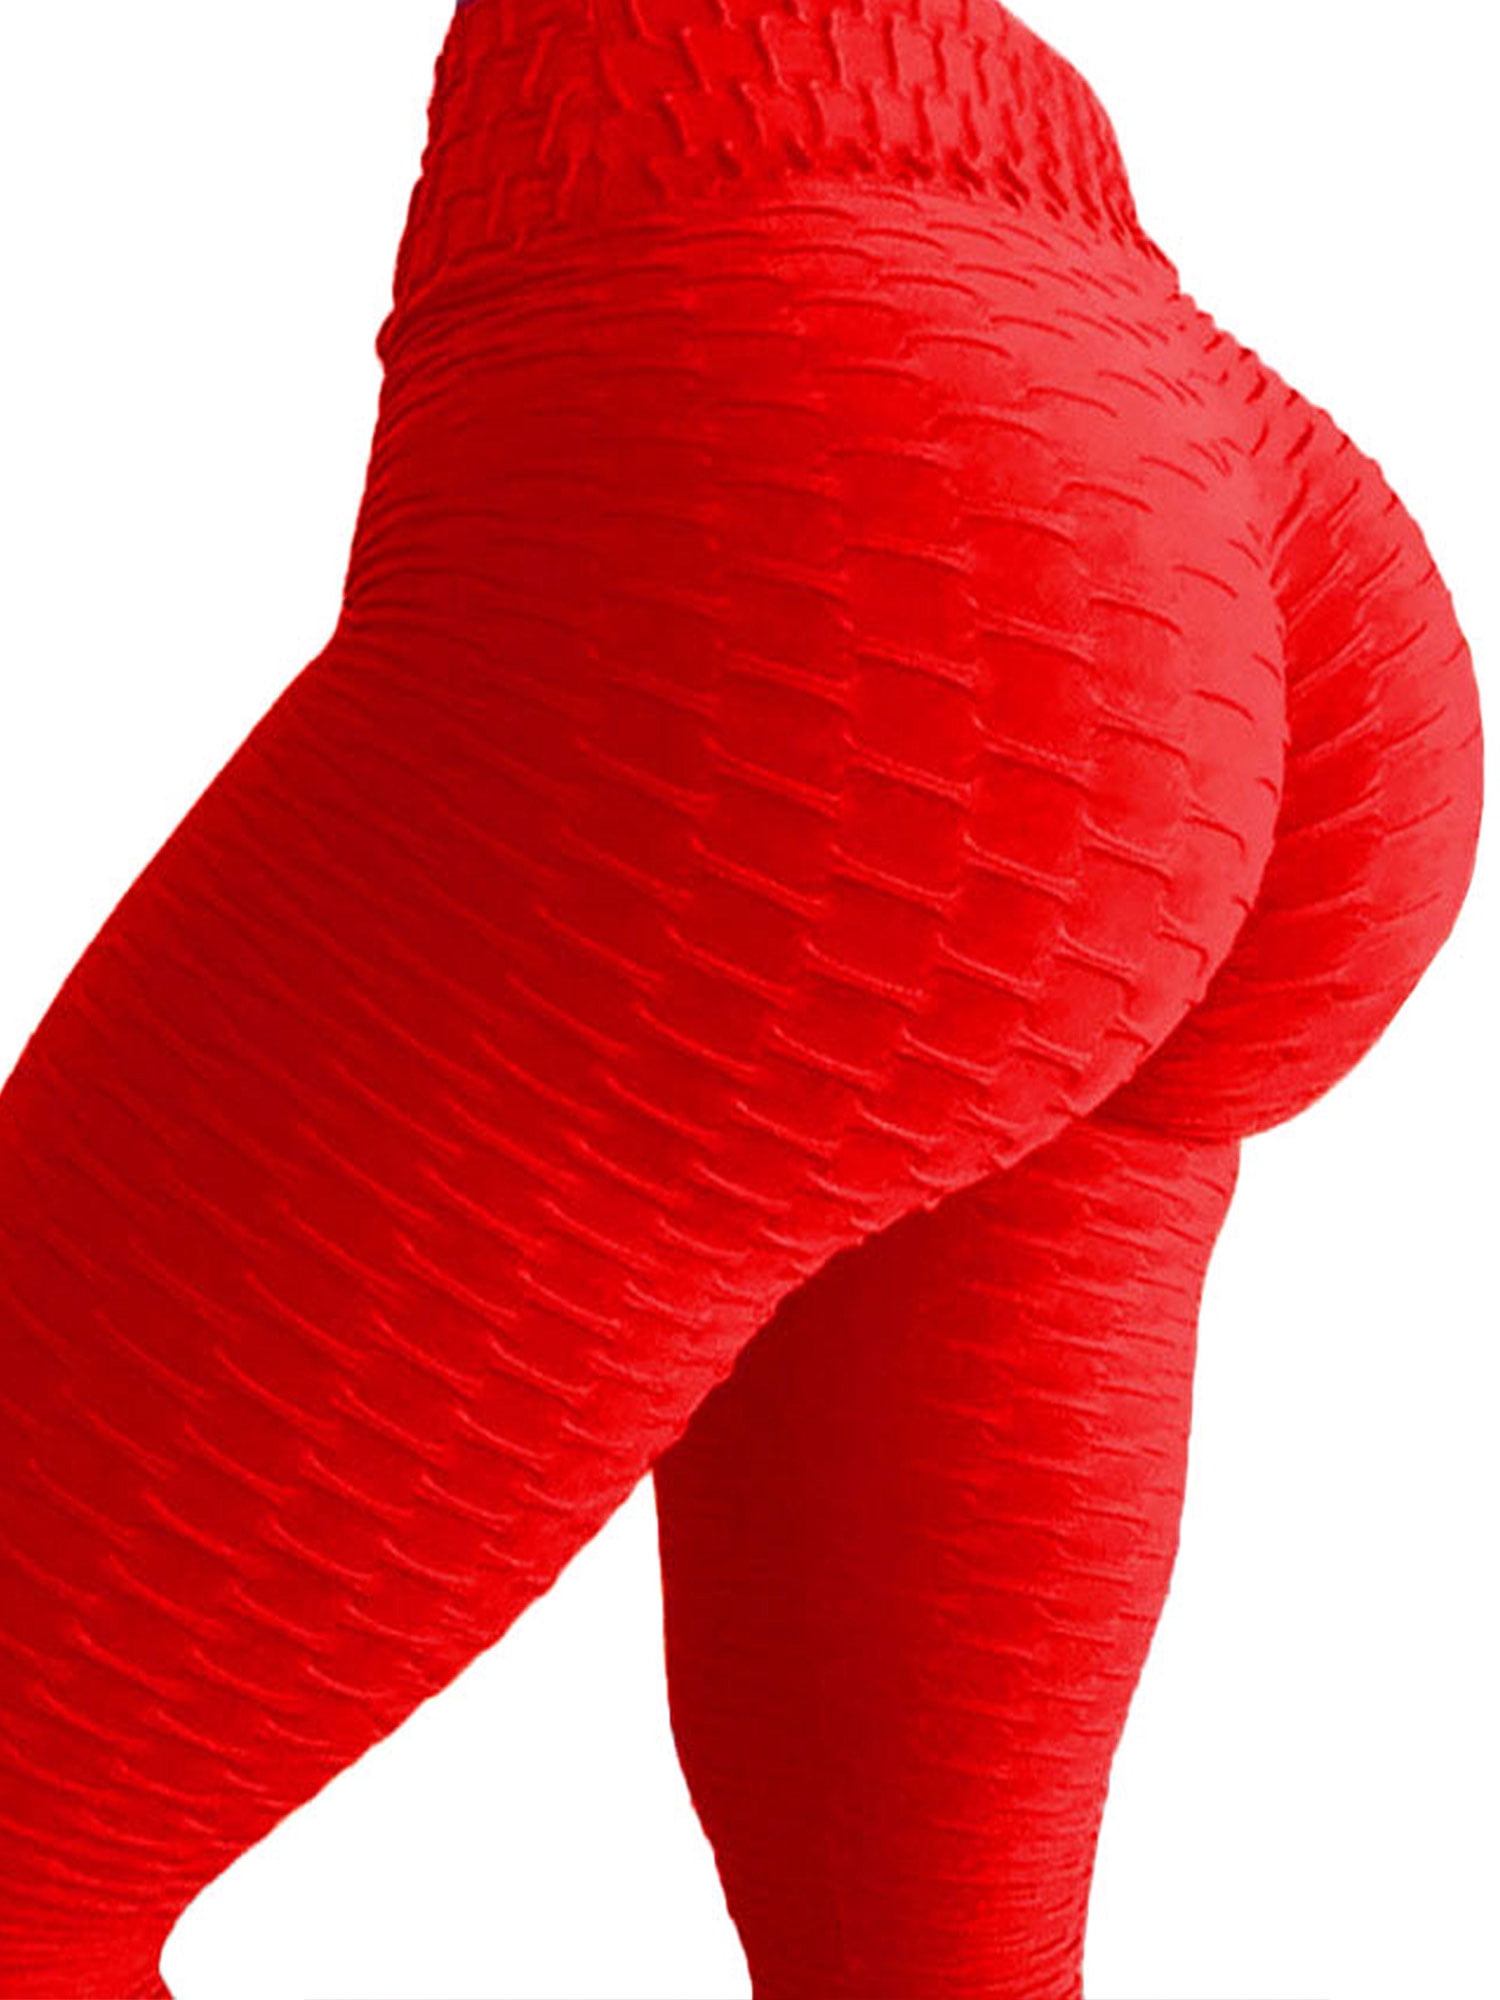 Details about   Mens Compression Trousers Fitness Sports Activewear Leggings Casual Pants Bottom 